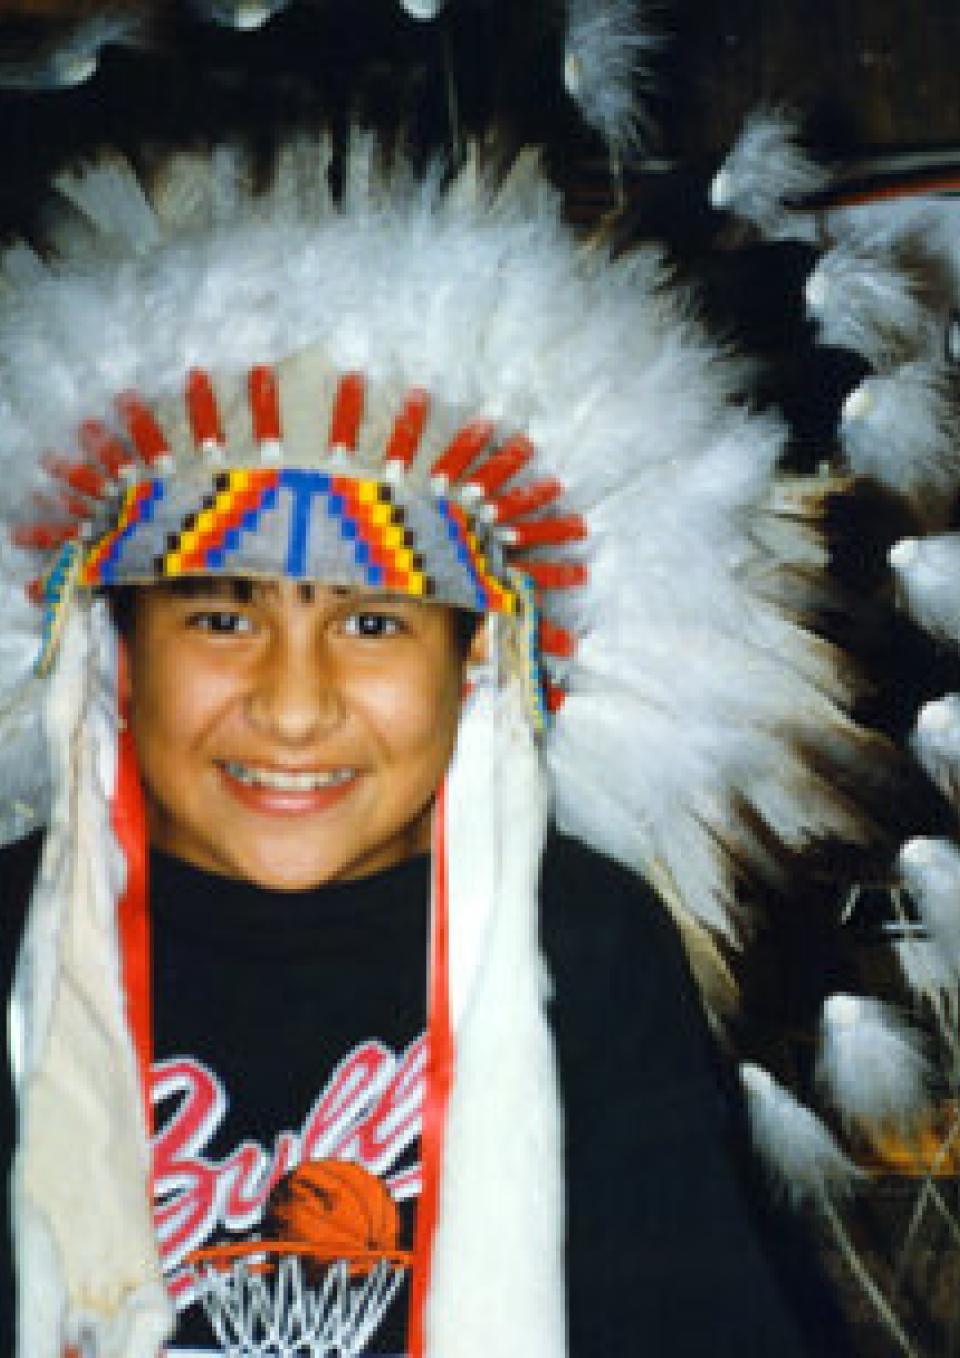 A child with brown skin wears a Native American feather headdress and smiles at the camera. Behind the child on the wall, a blanket and artwork depicting a Native person with long hair.